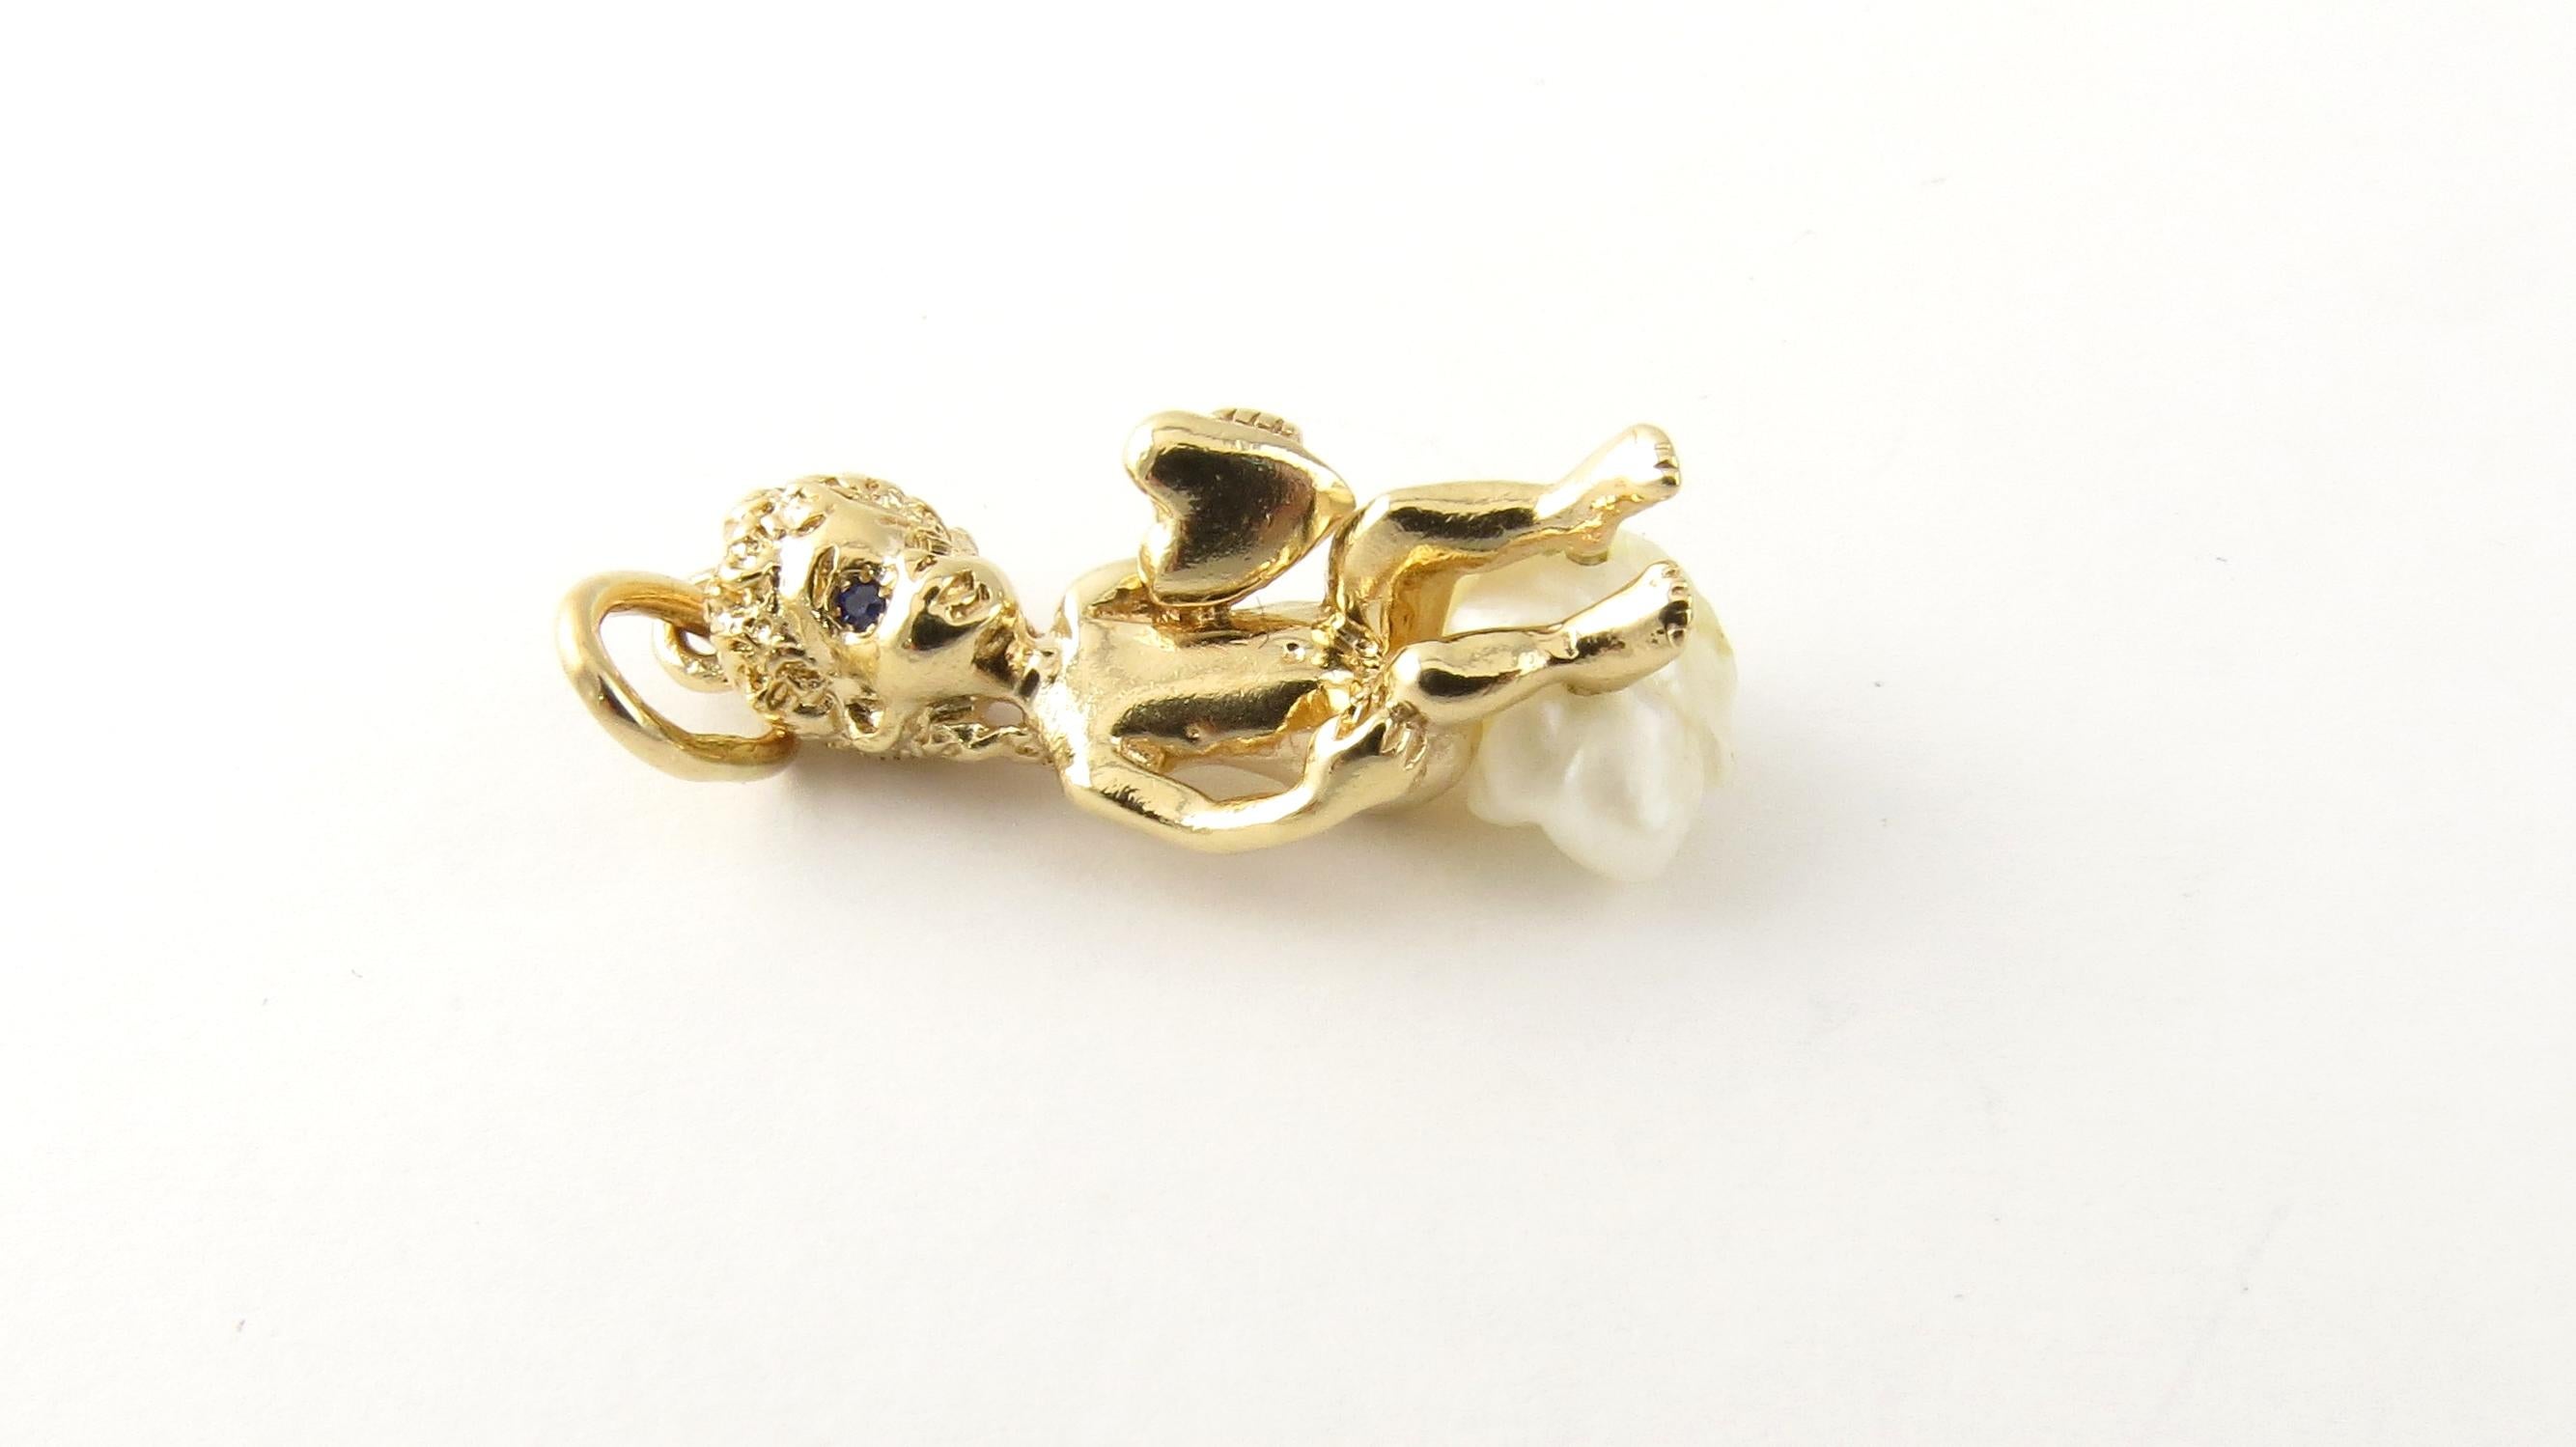 Vintage William Ruser 14 Karat Yellow Gold and Pearl Cherub Charm.

This adorable cherub sits atop a freshwater pearl meticulously crafted in 14K yellow gold.

Size: 27 mm x 10 mm (actual charm)

Weight: 3.6 dwt. / 5.6 gr.

Stamped: 14K Ruser

Very